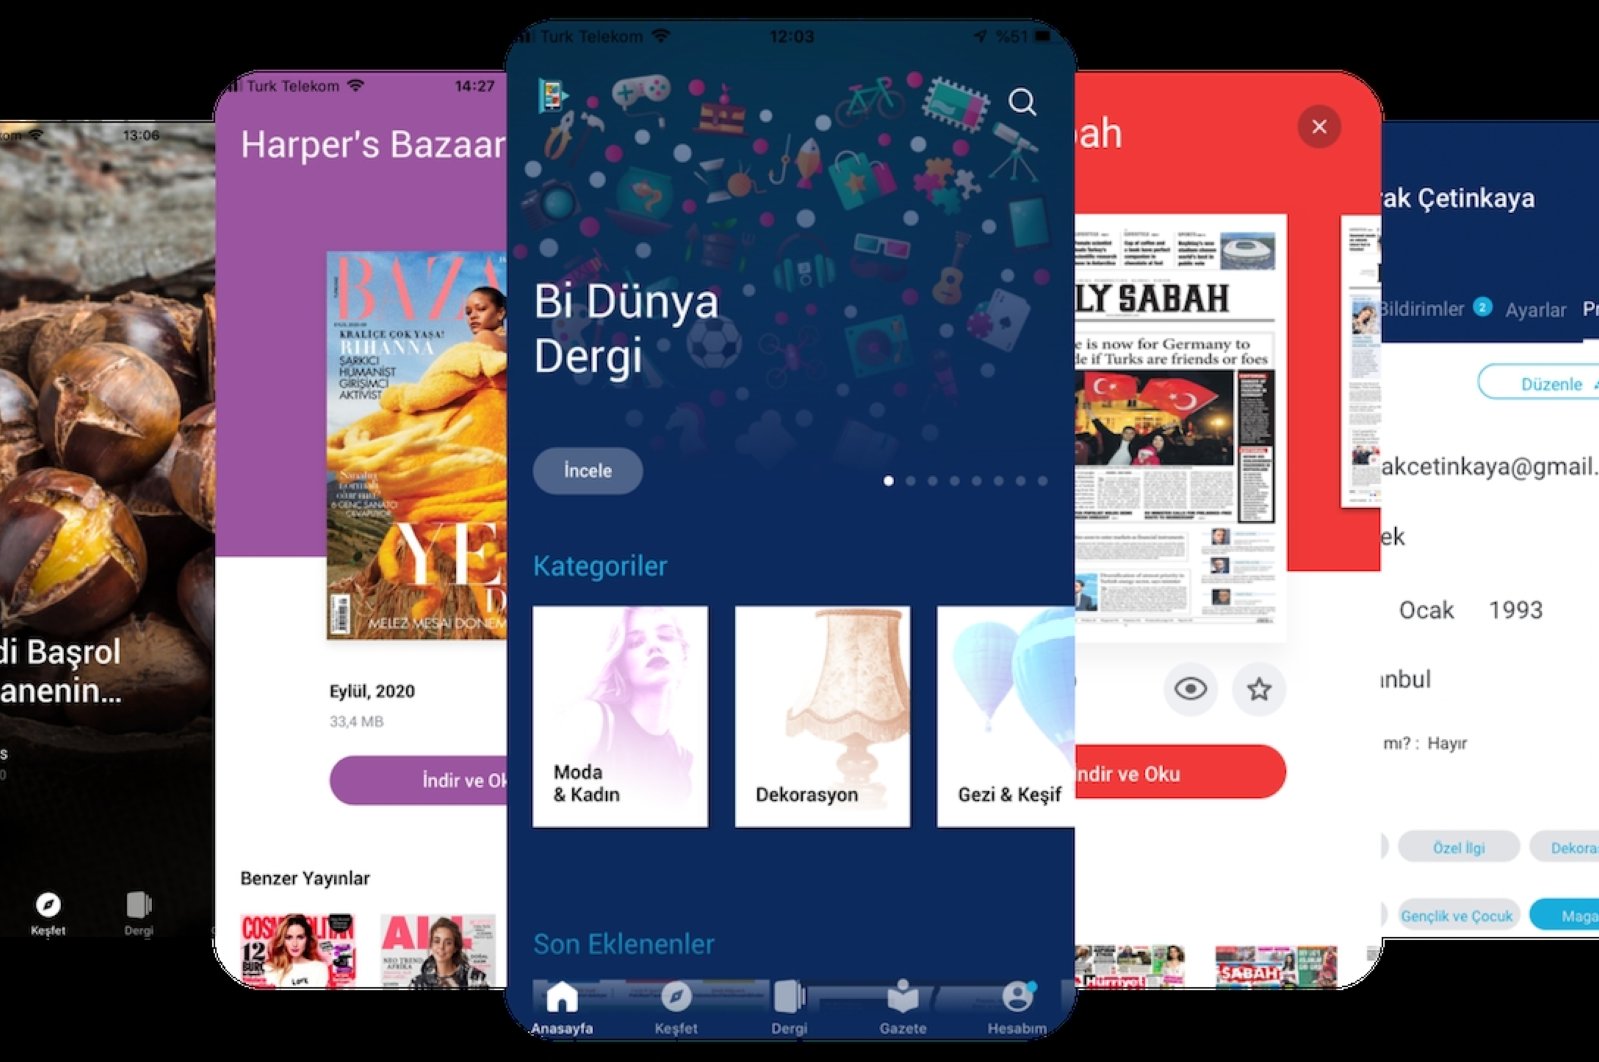 Türk Telekom's e-magazine platform makes it possible to access many magazines and daily newspapers in different categories. (Photo courtesy of Türk Telekom)